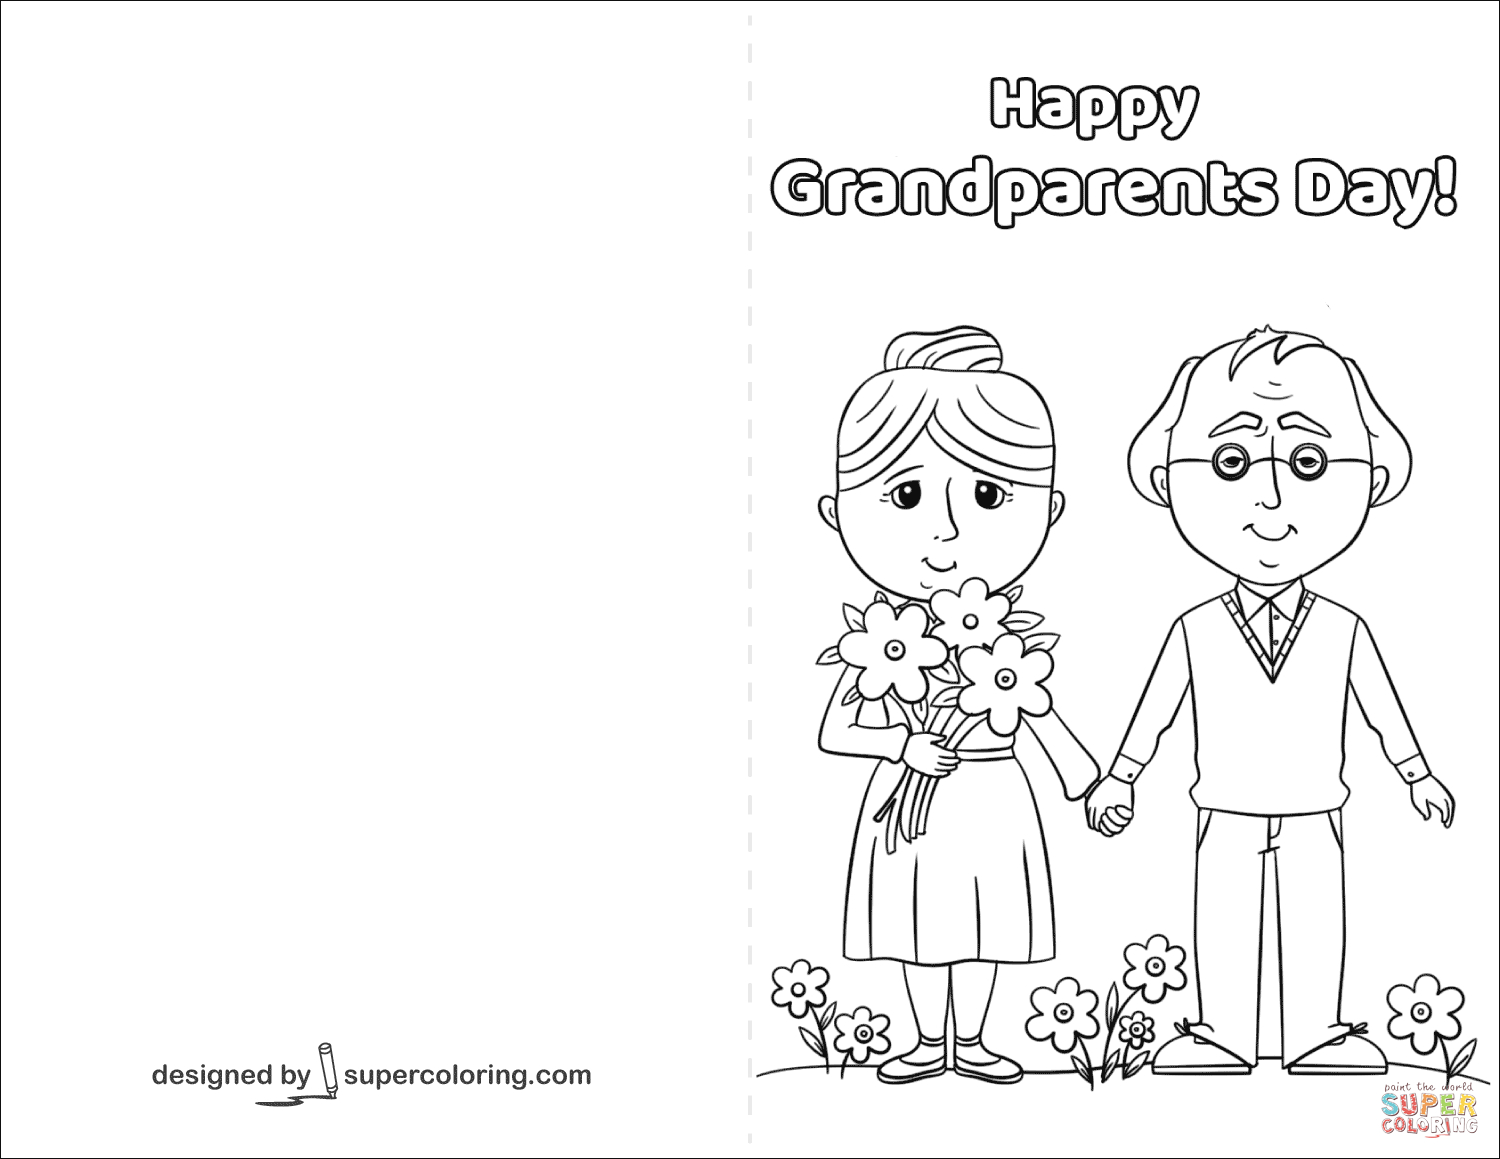 Happy Grandparents Day Card Coloring Page | Free Printable Coloring - Grandparents Day Cards Printable Free